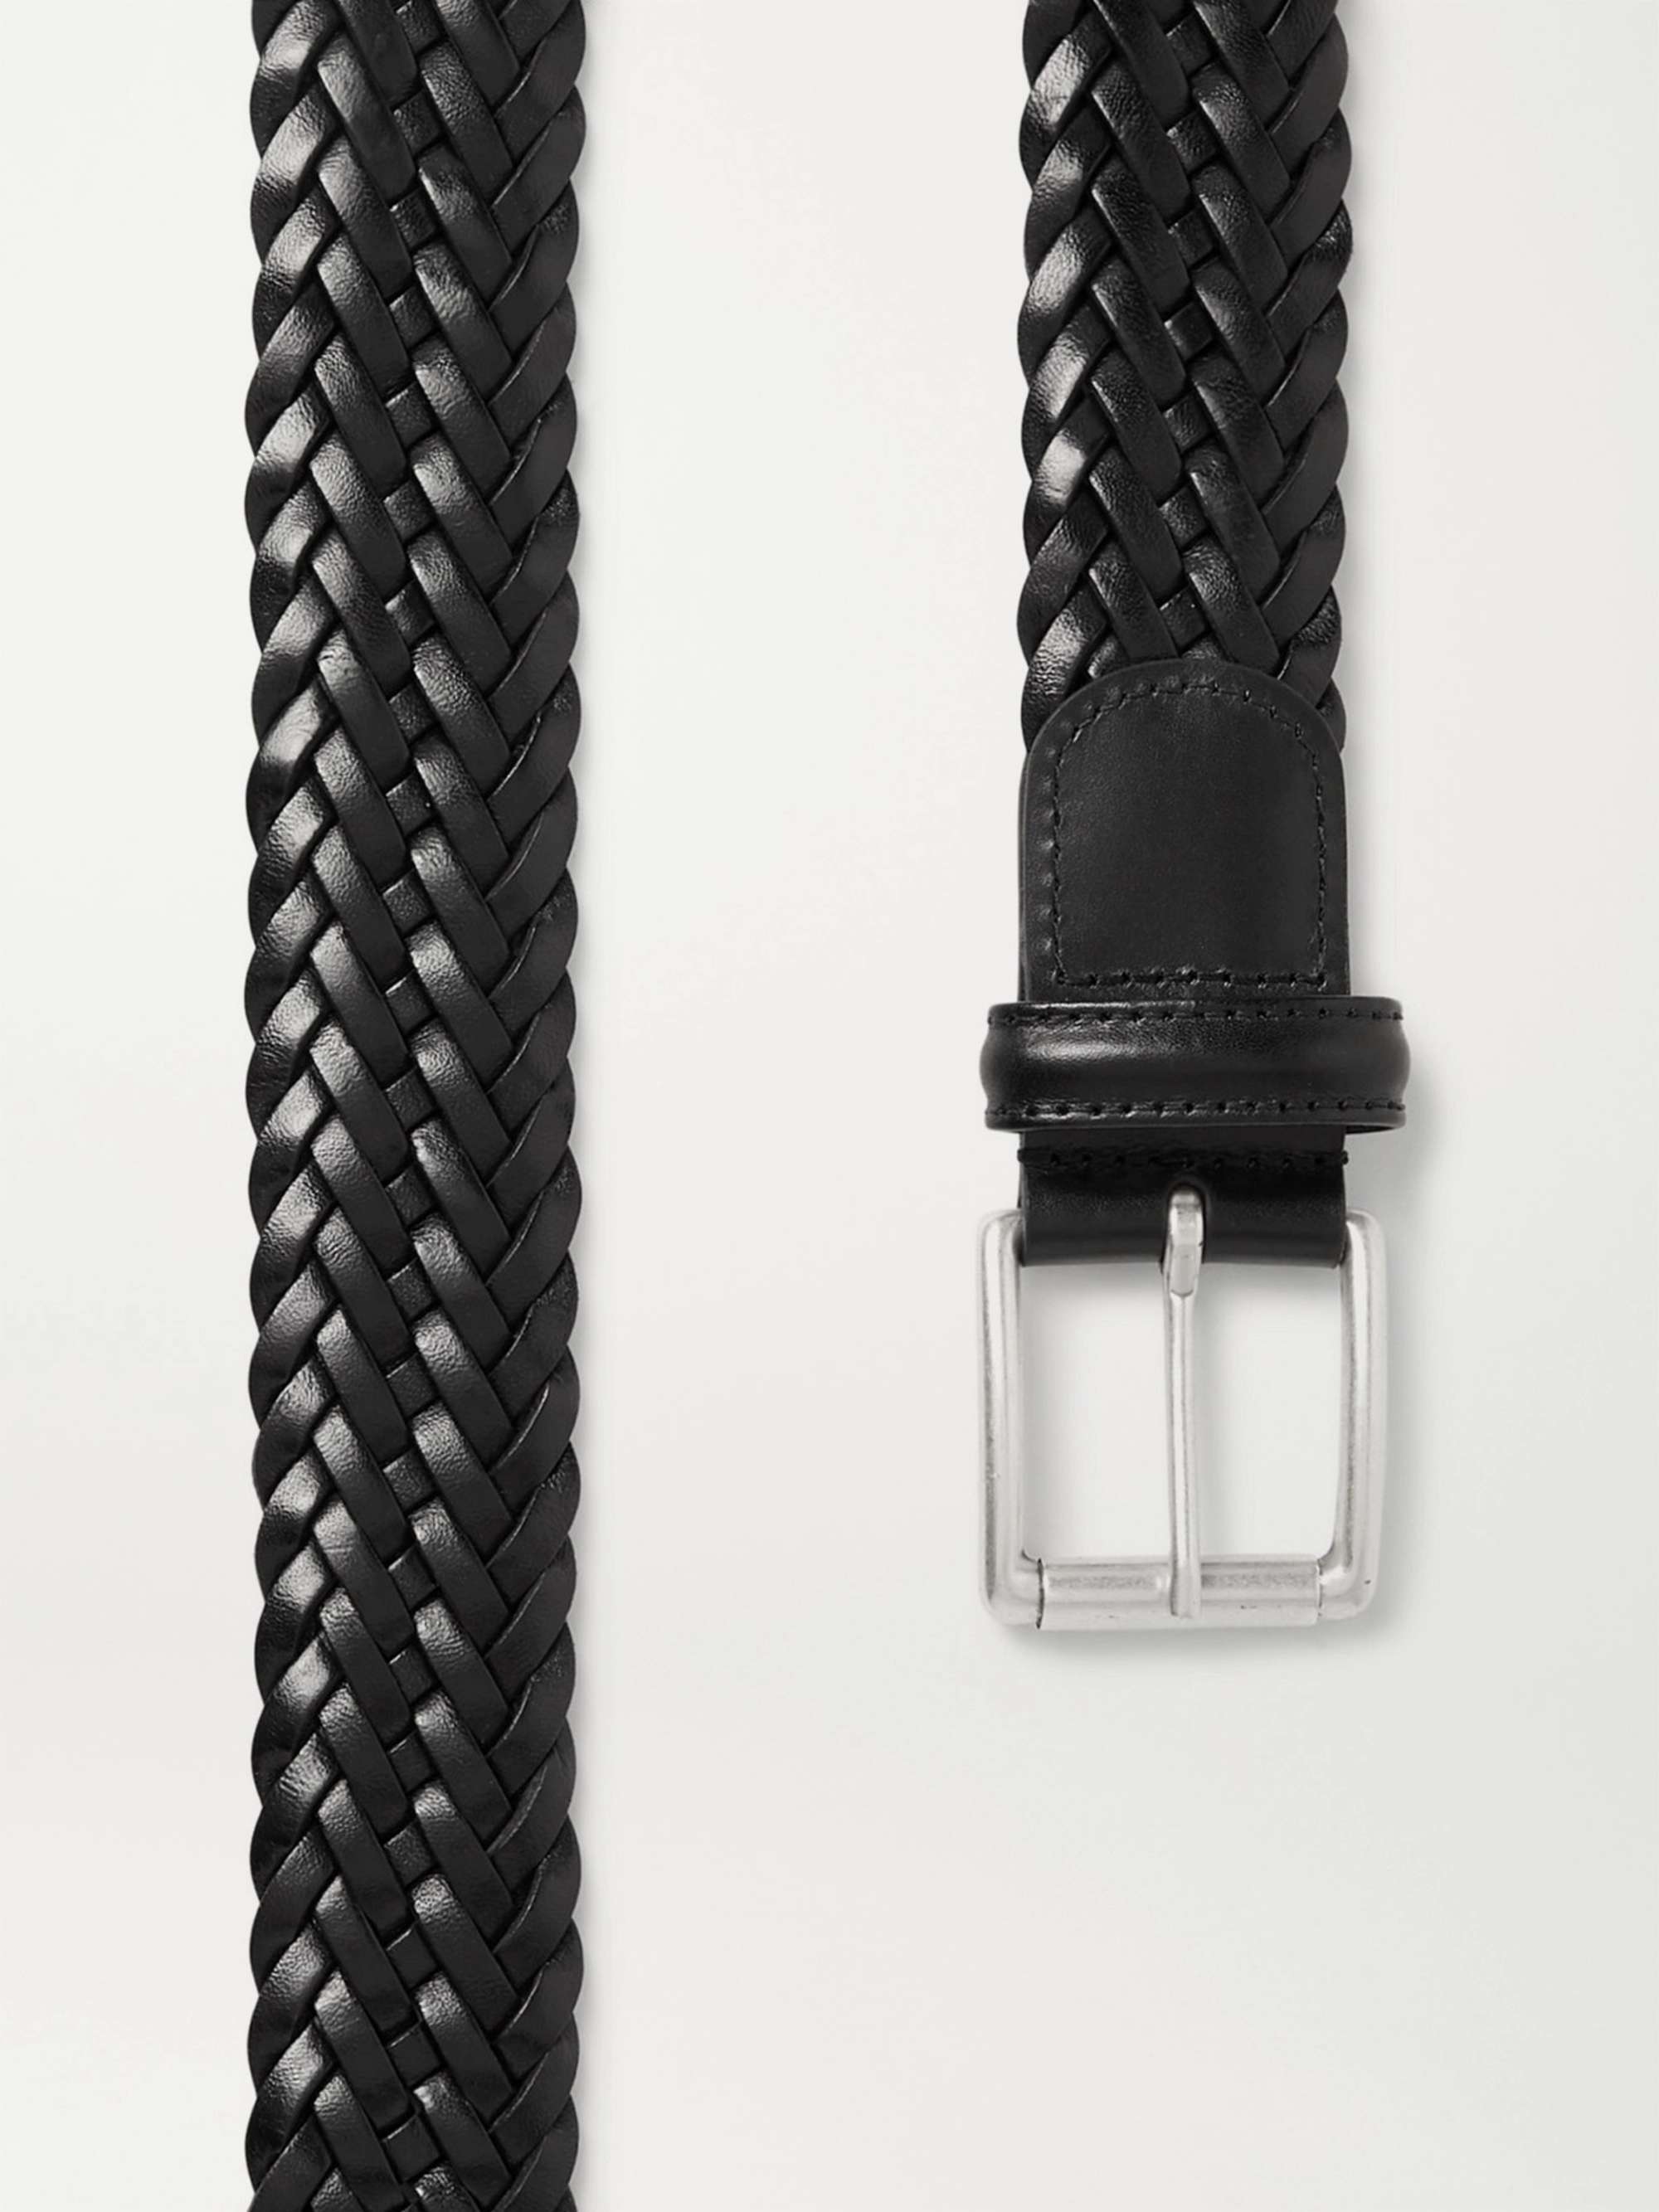 MANDRN | The Carry - Black Woven Leather Strap